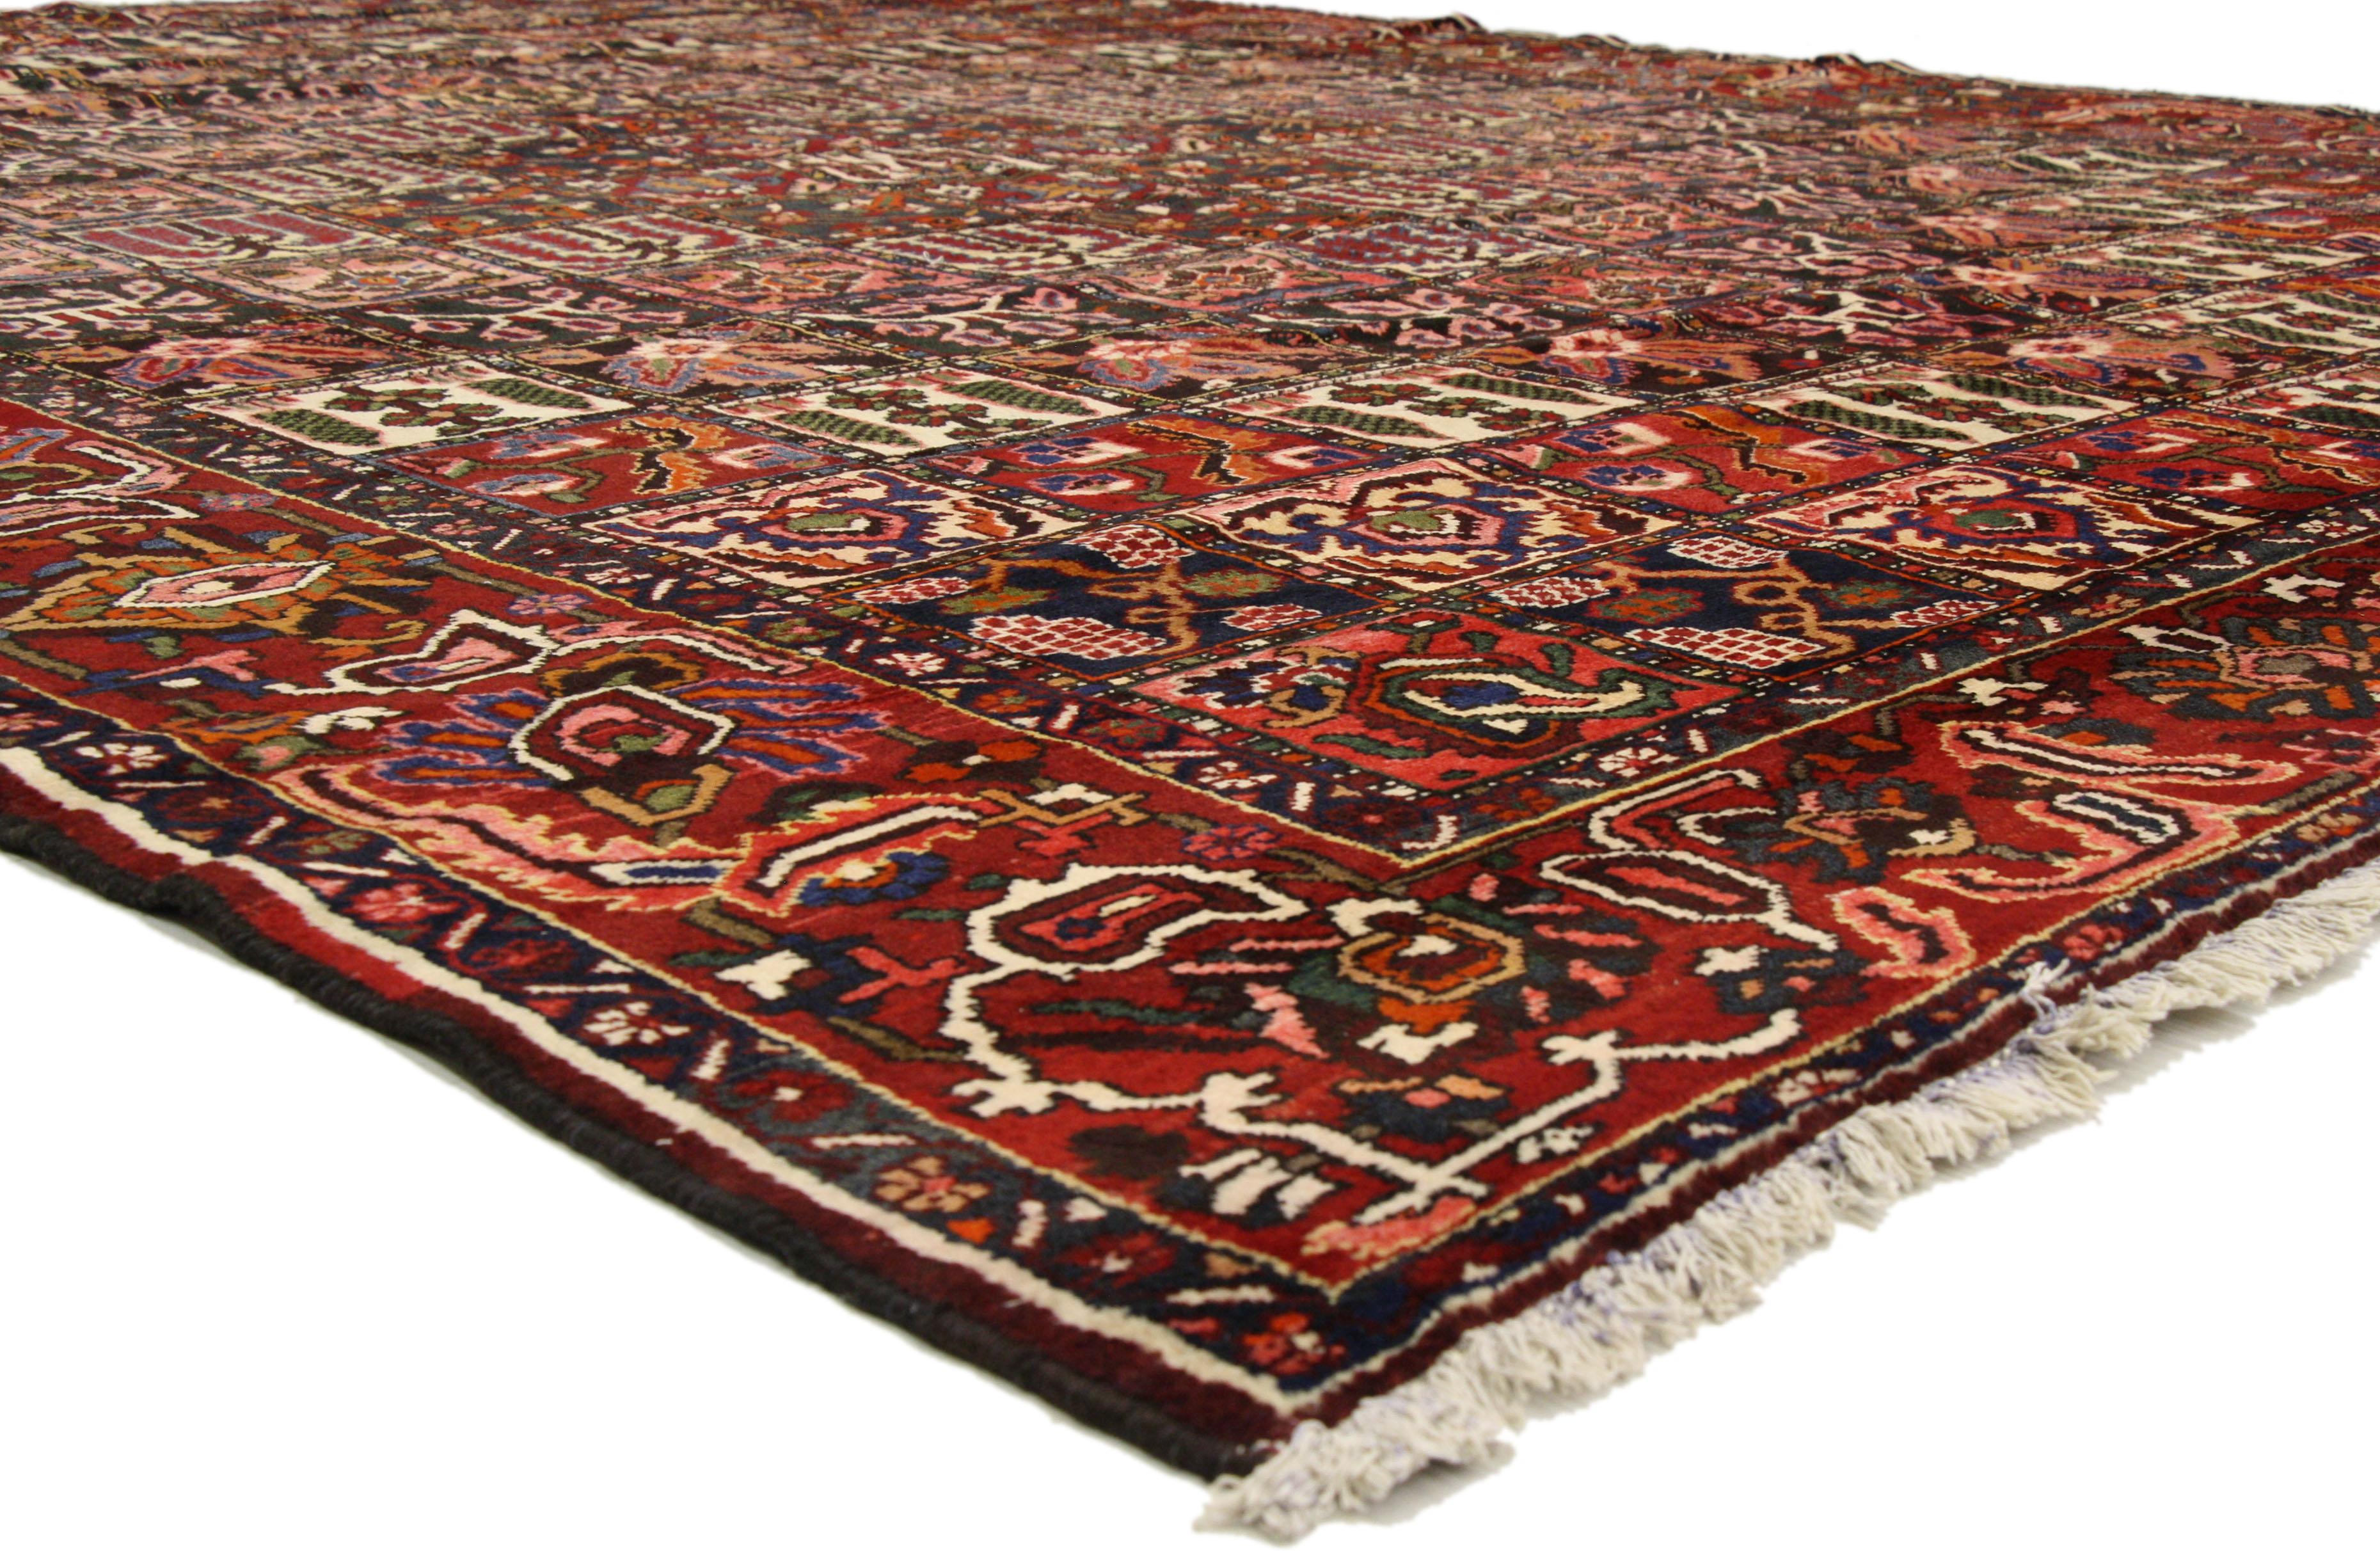 71802 Antique Persian Bakhtiari Rug with Four Seasons Garden Design 11’06 x 15’06. Rich jewel tones integrated with a rich patina, this antique Persian Bakhtiari rug features the Four Seasons design with a traditional modern style. Classically